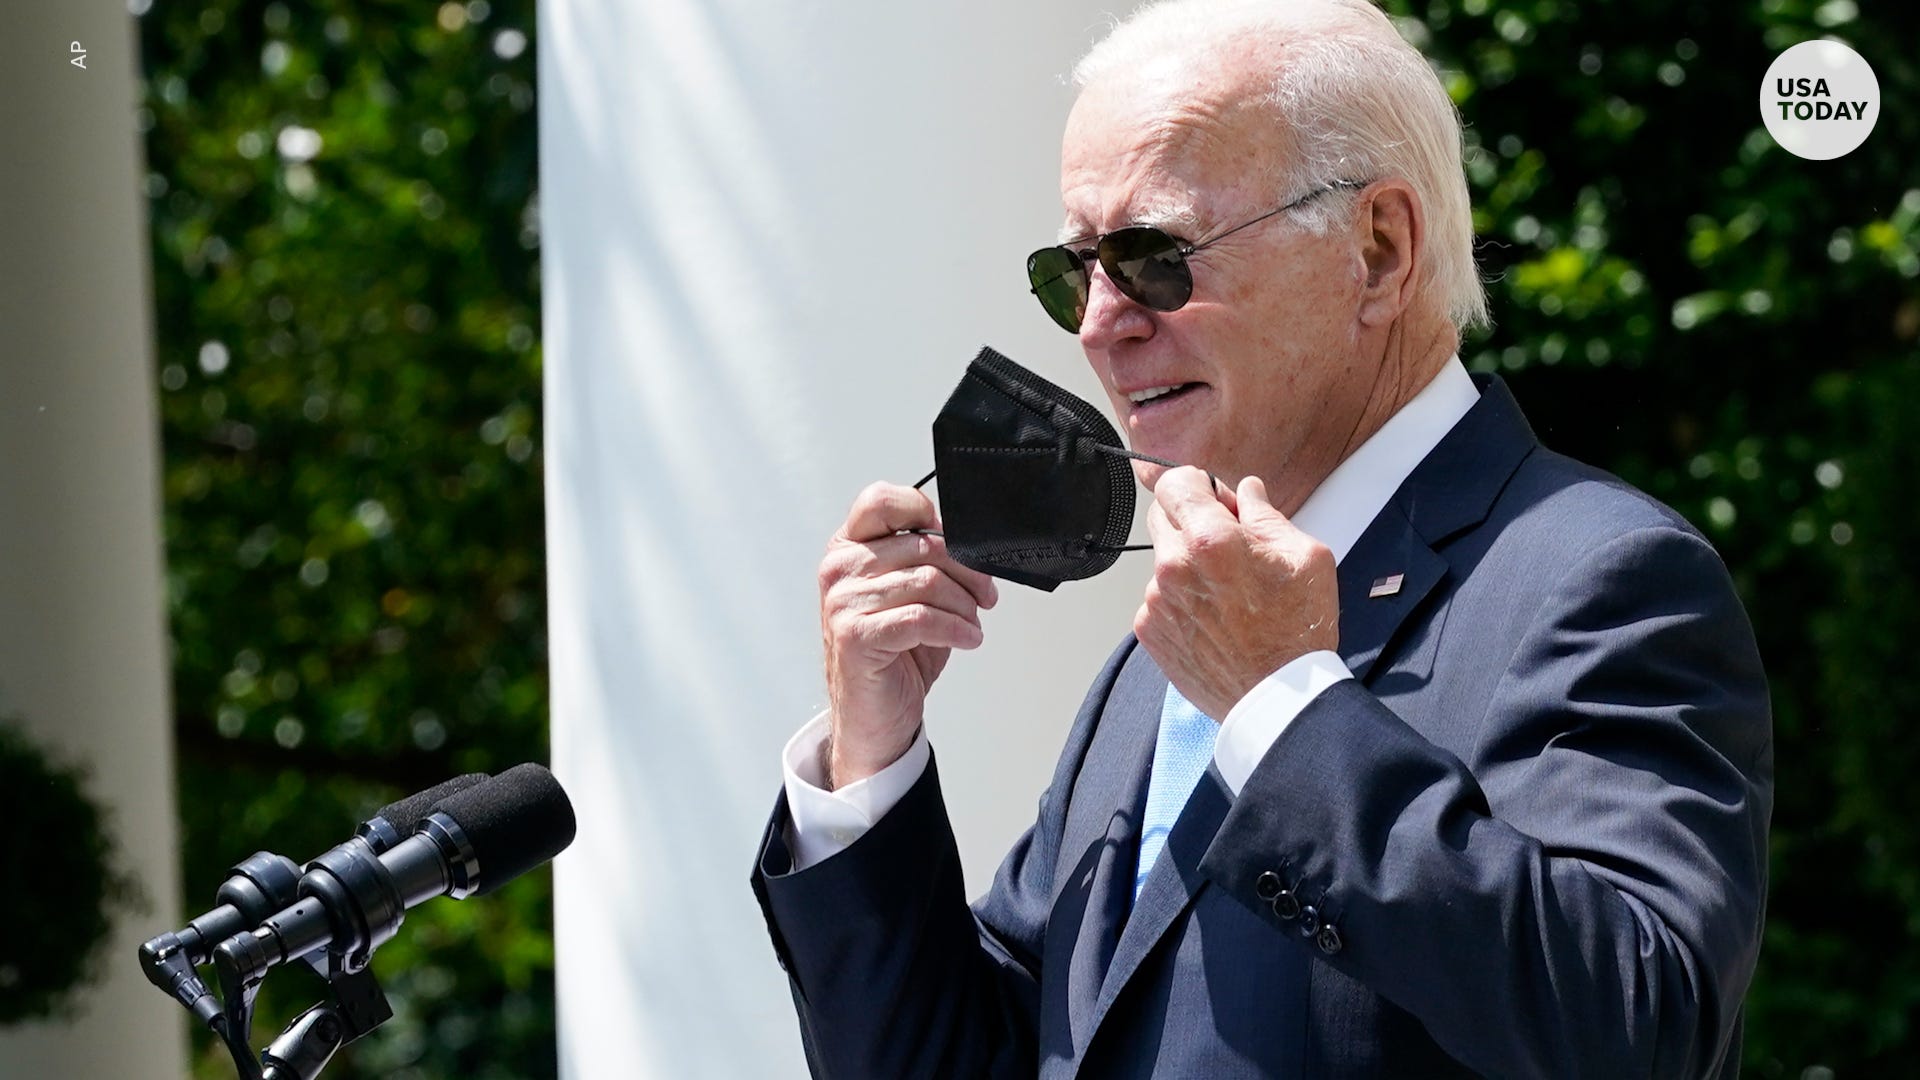 Biden will end COVID-19 emergency declarations on May 11 after more than 3 years